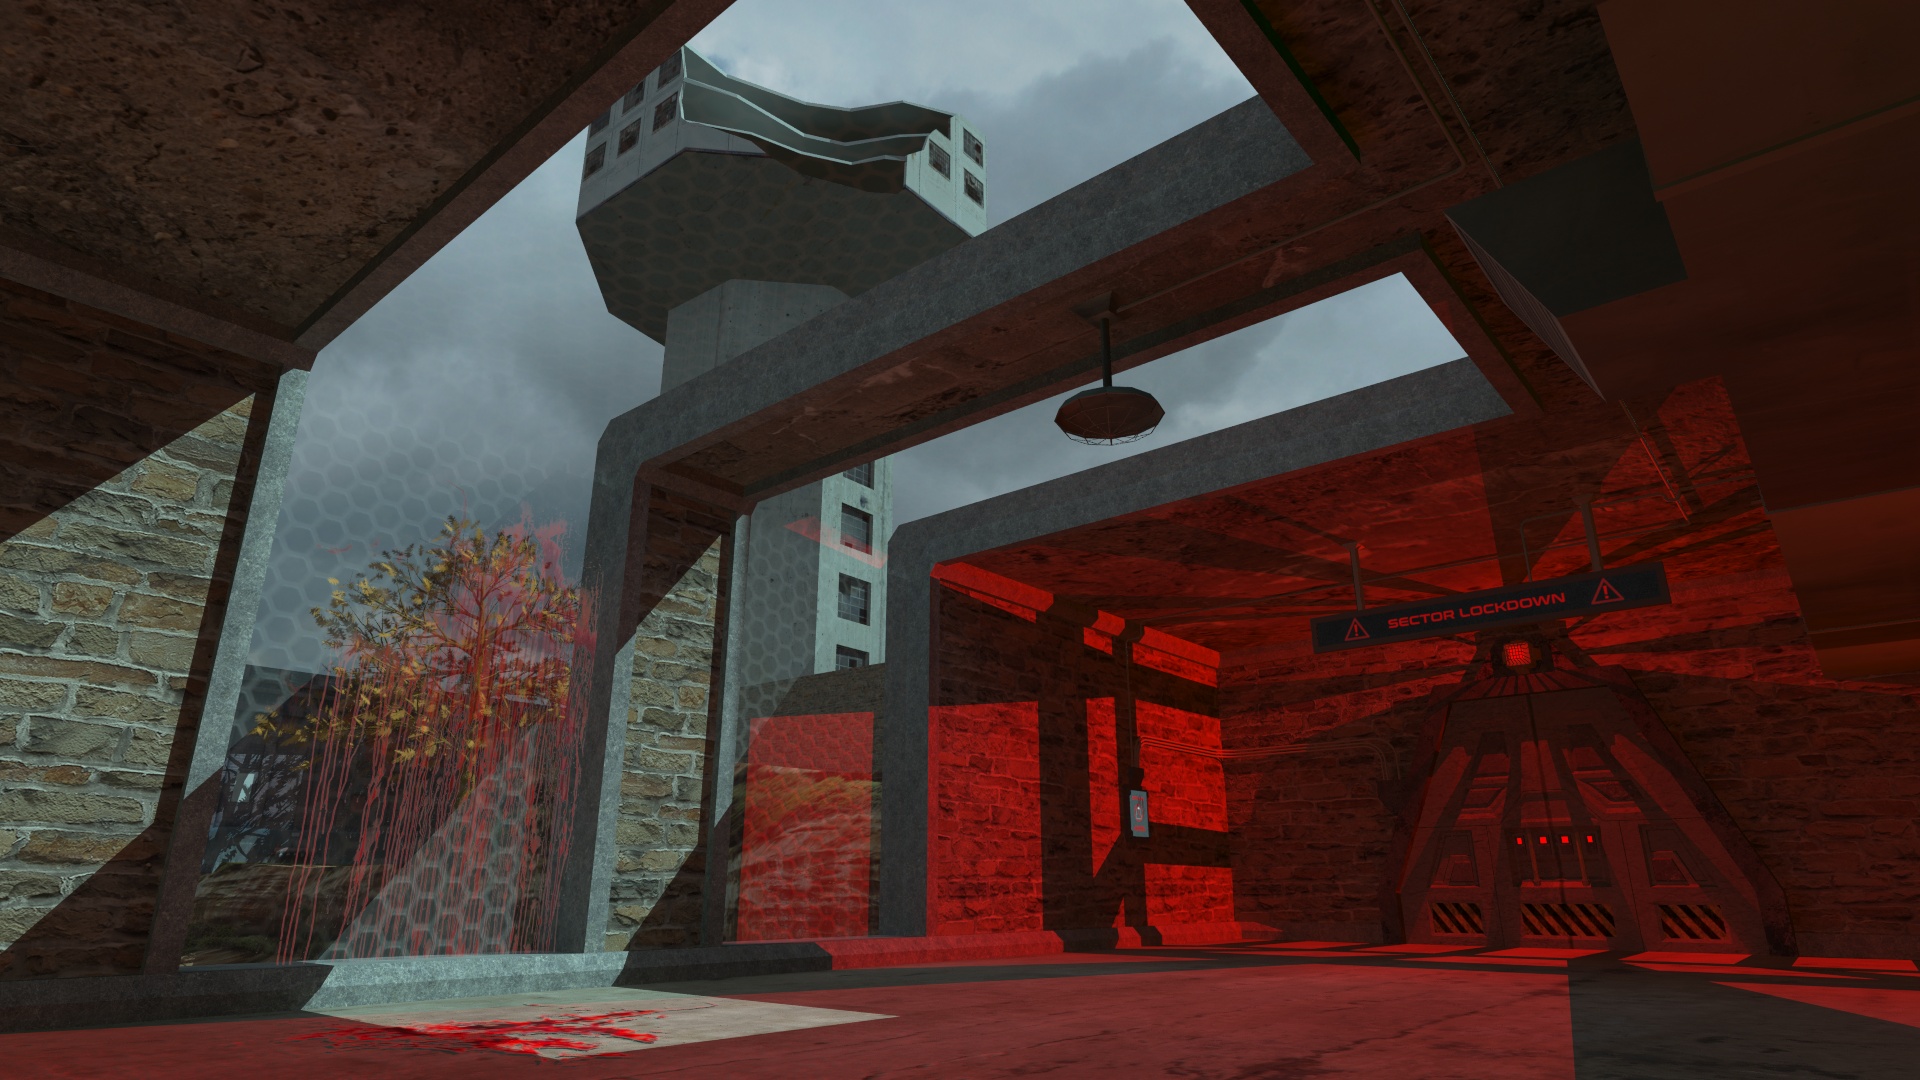 This is an indutrial sci-fi scene that shows a hi-tech facility during a lockdown procedure. However, closer inspection of the scene reveals something more sinister. This design was intended to instill a feeling of dread and unease as the player explores the facility to find the cause of the destruction.